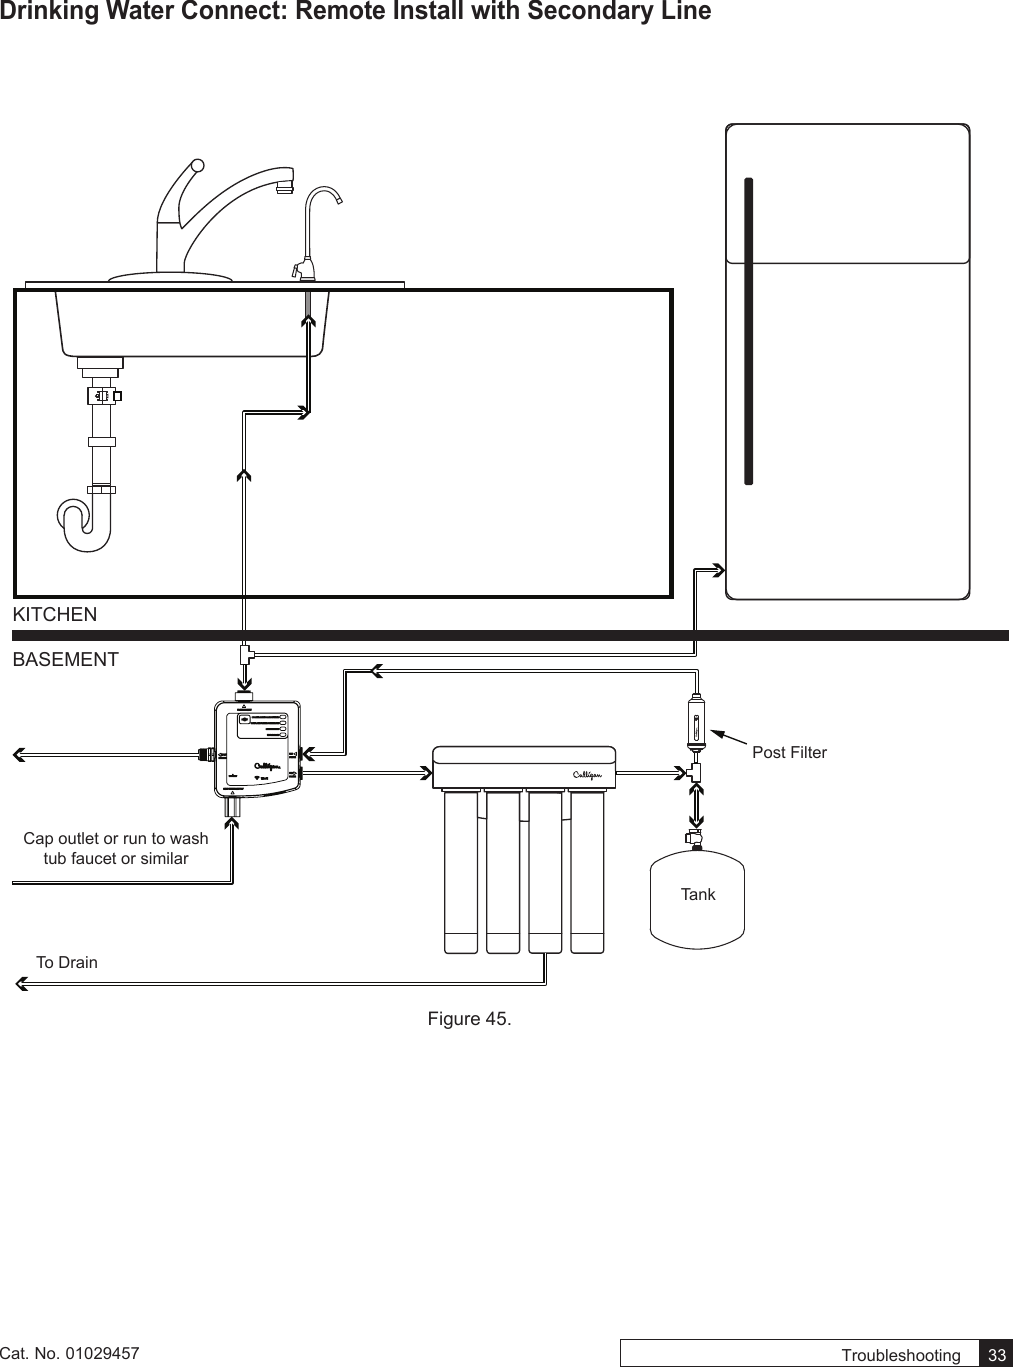 Troubleshooting    33Cat. No. 01029457Drinking Water Connect: Remote Install with Secondary LineKITCHENBASEMENTTo DrainPost FilterTankCap outlet or run to wash tub faucet or similarFigure 45. 